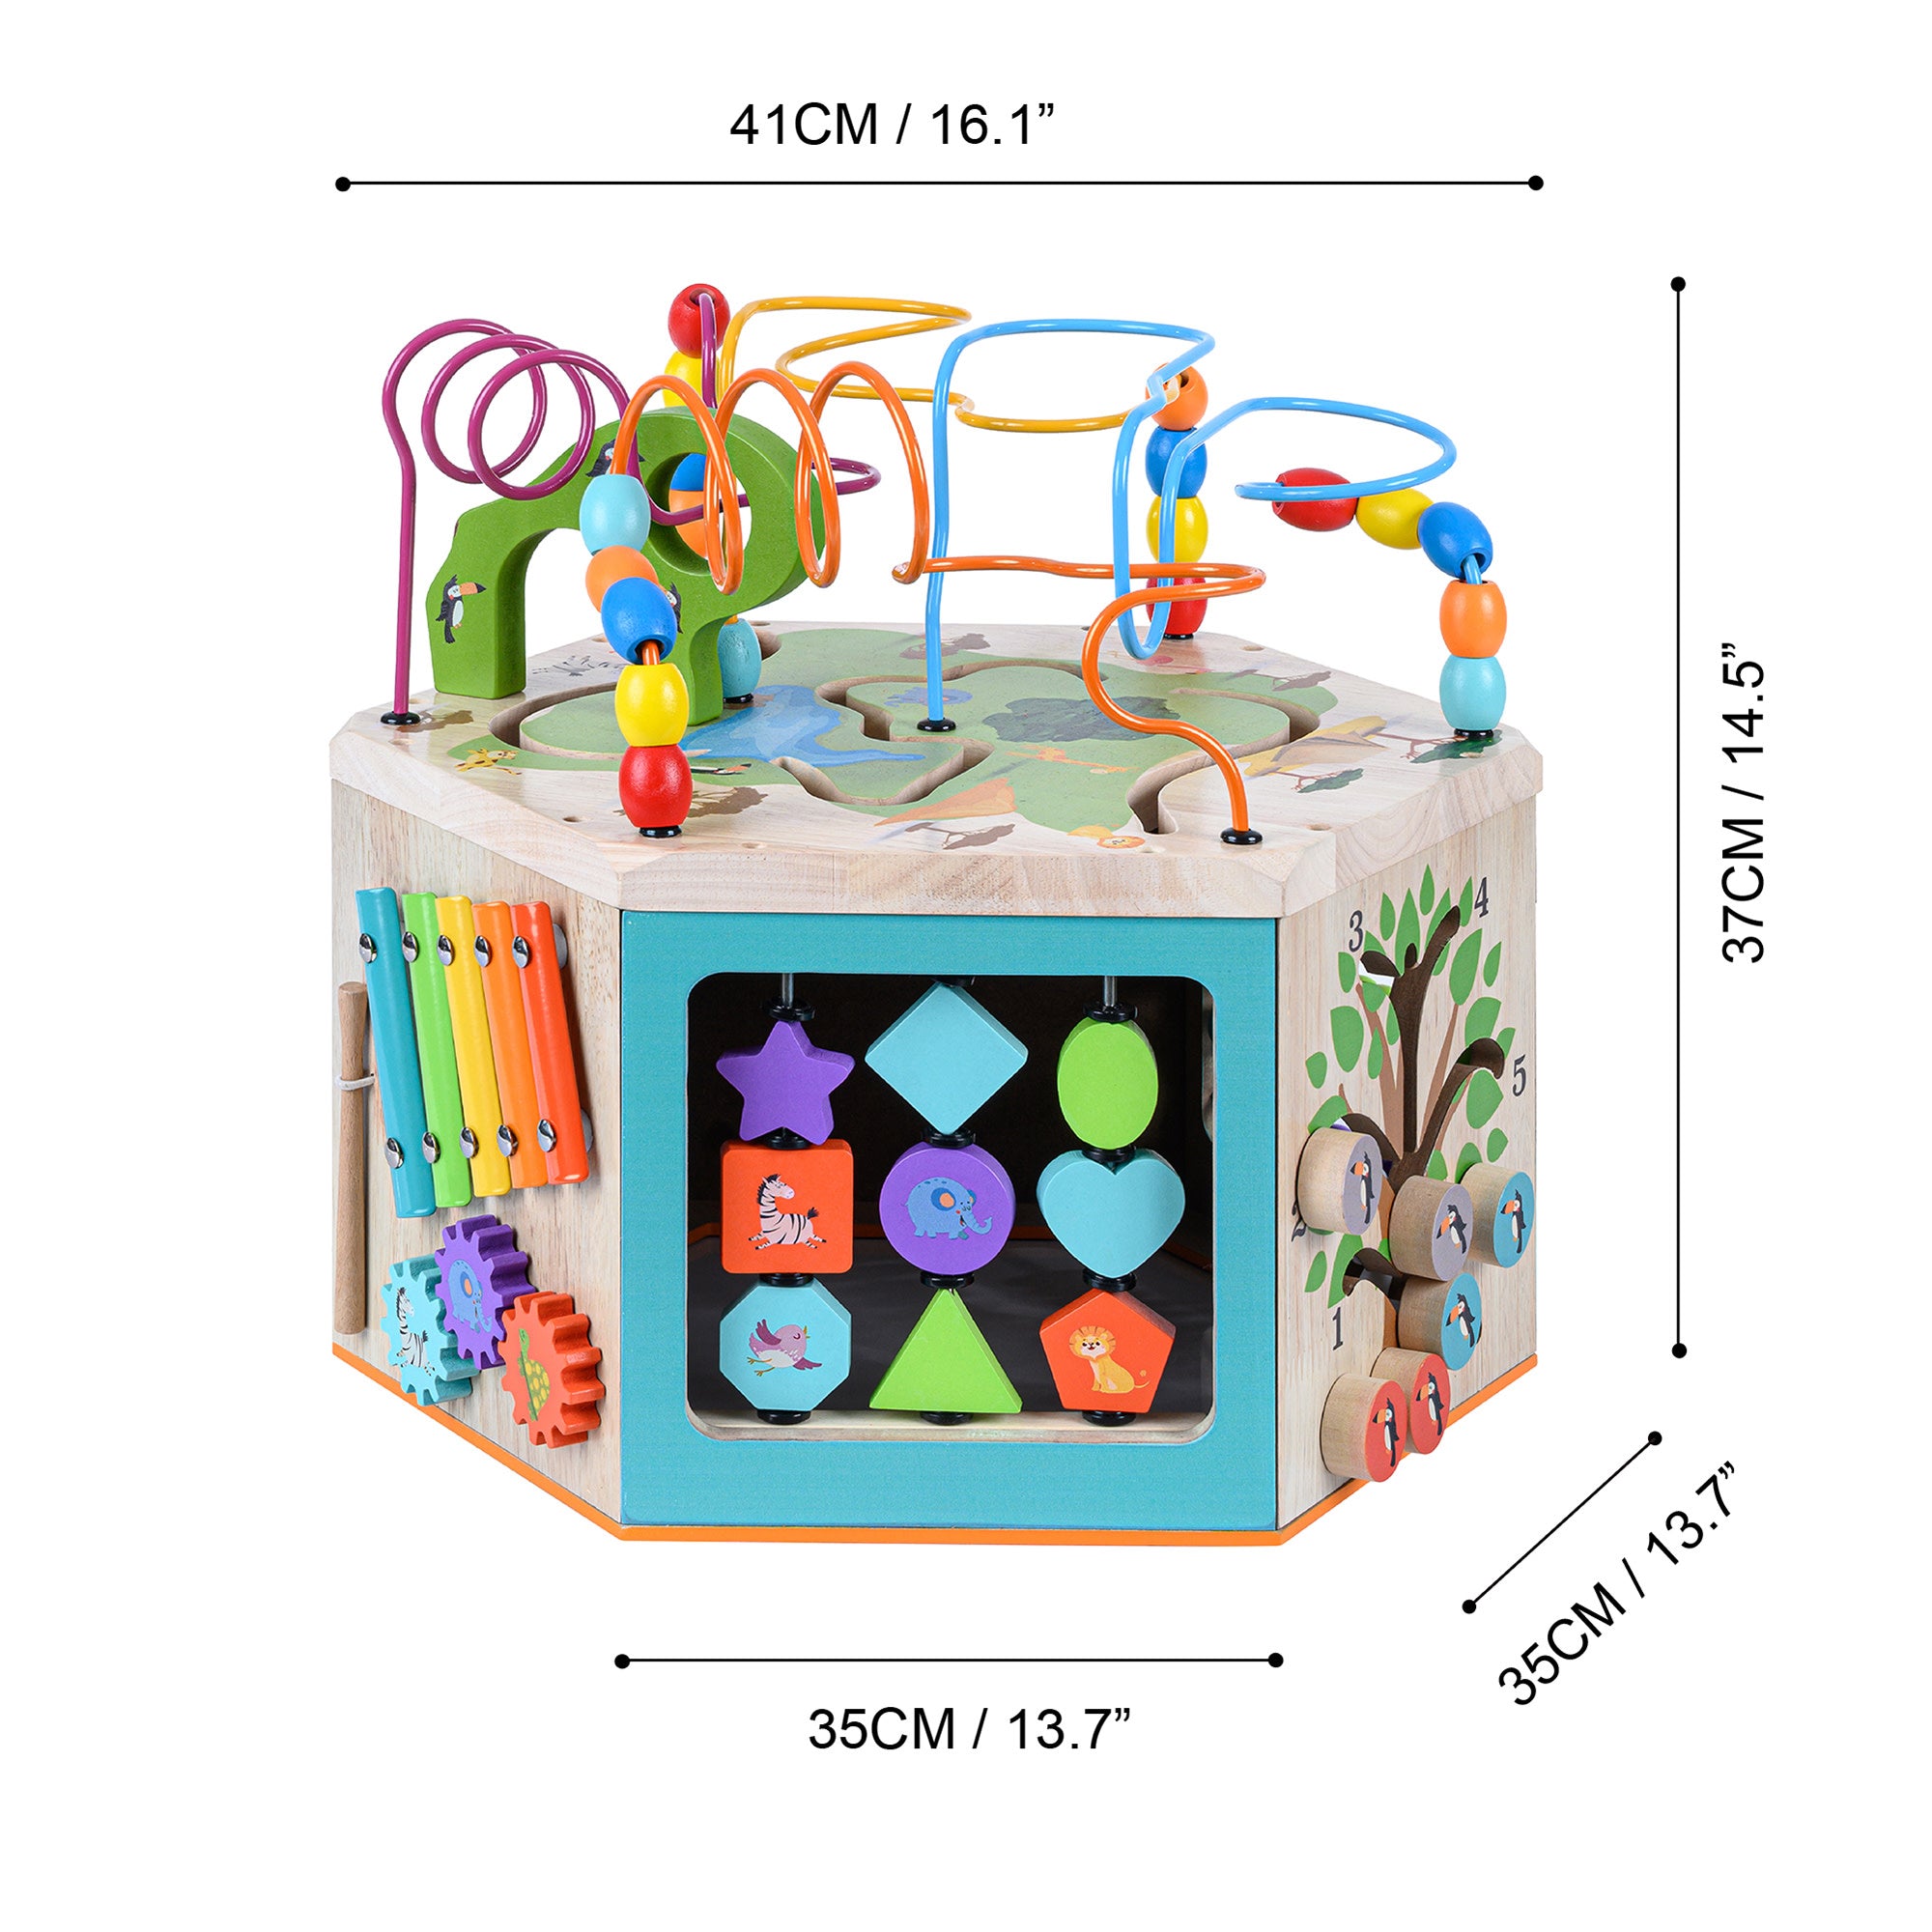 Teamson Kids Preschool Play Lab 7-in-1 Large Wooden Activity Station, Natural